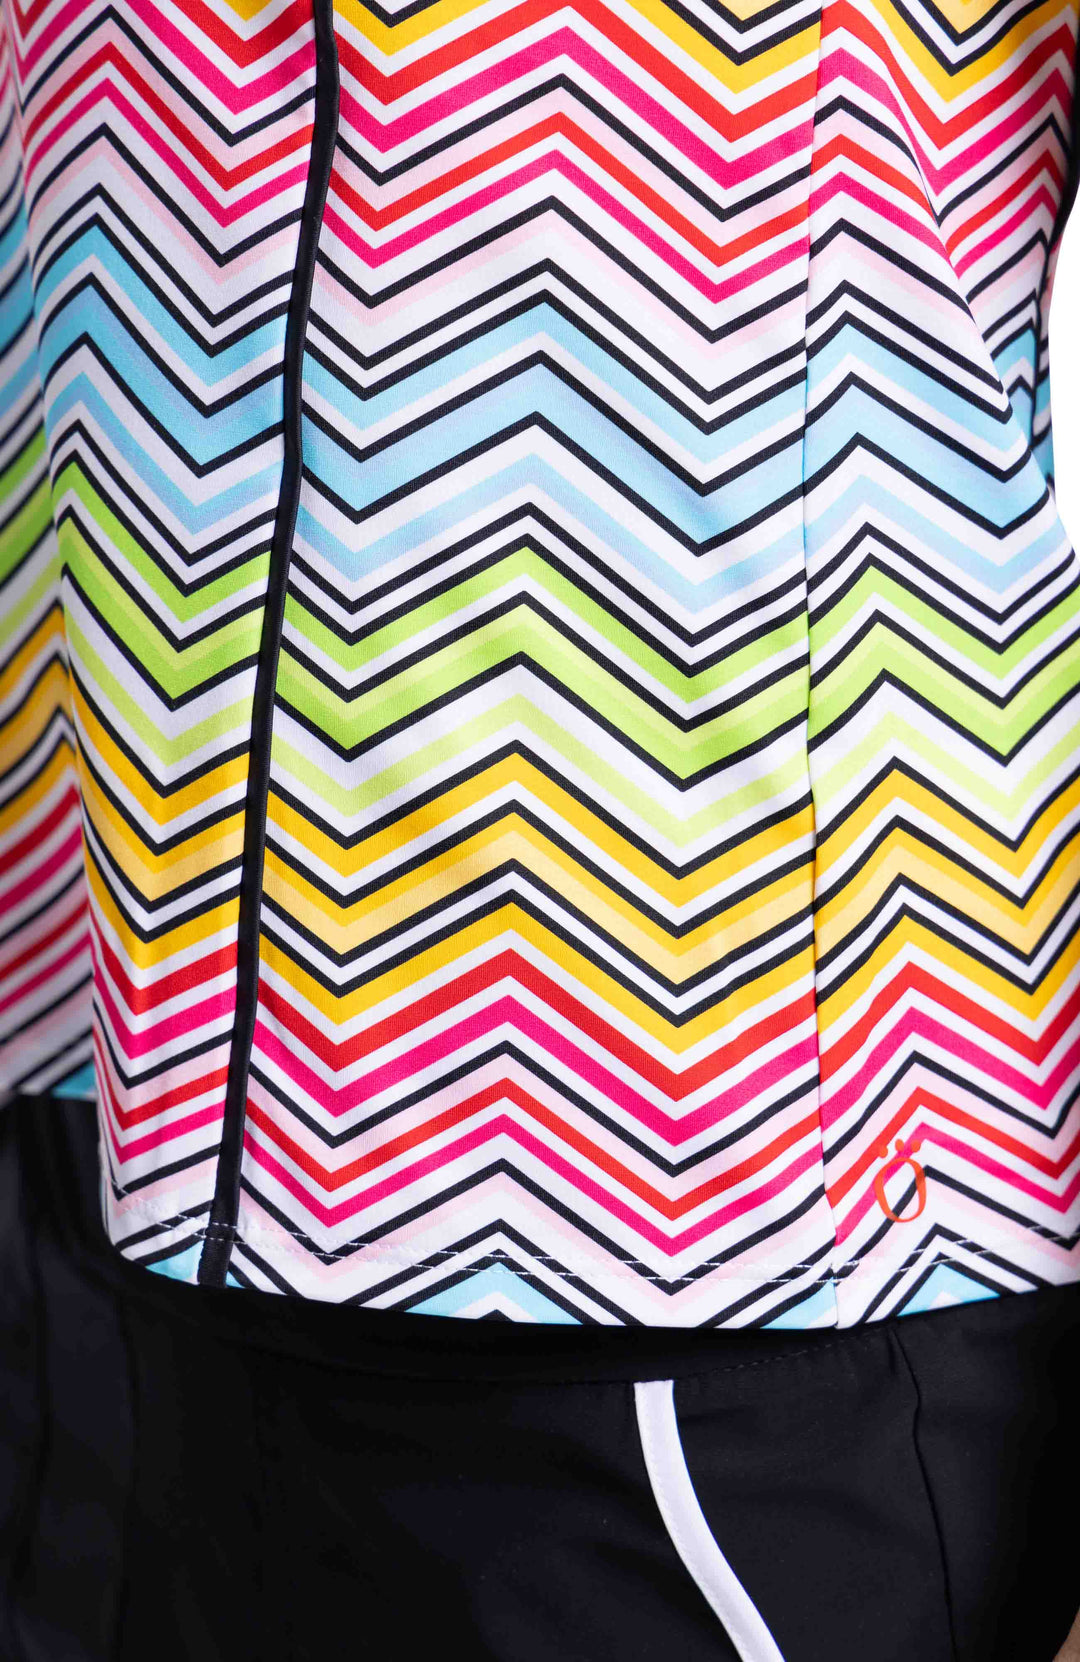 Close up of fabric of TWILIGHT SLEEVELESS GOLF TOP - SUMMER HERRINGBONE pattern in light blue, green, yellow, pink and black